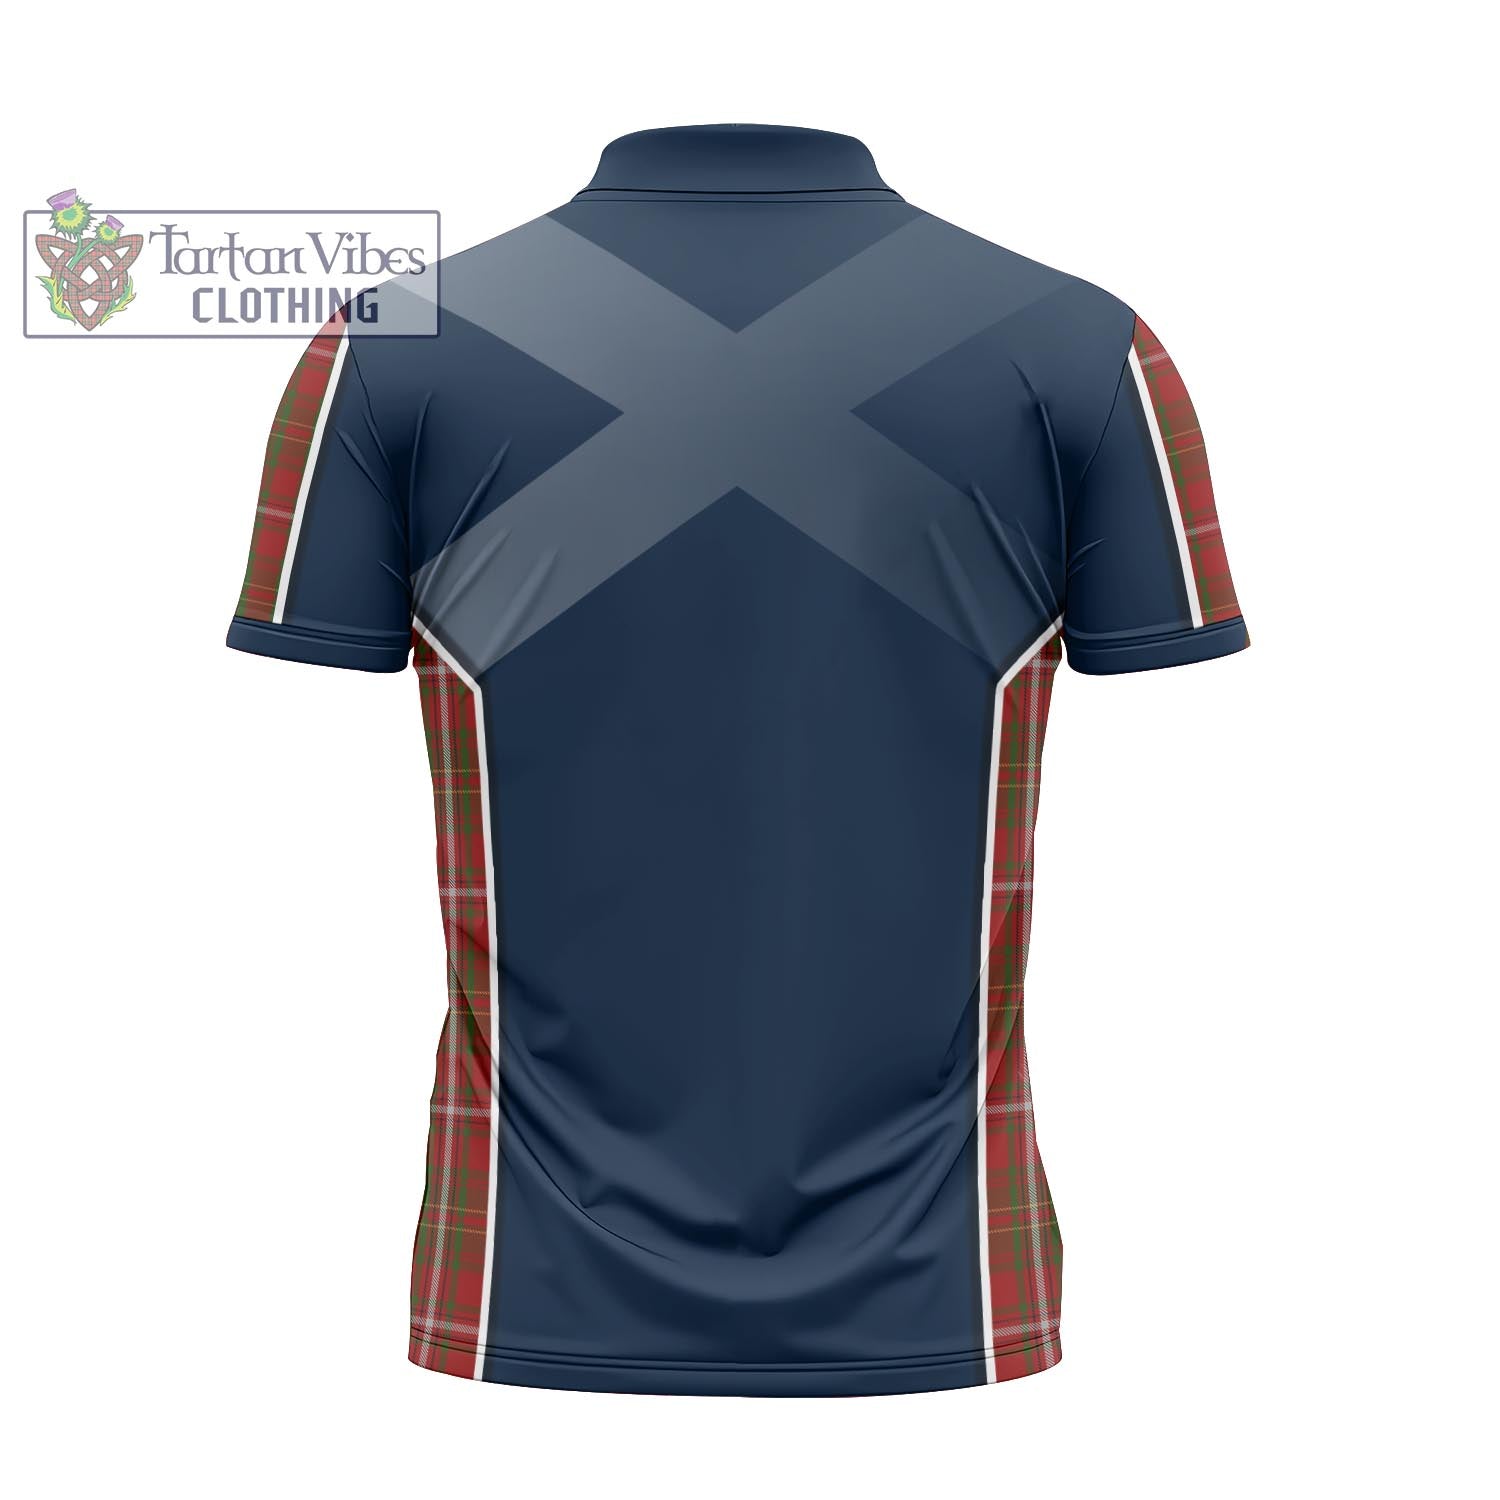 Tartan Vibes Clothing Hay Tartan Zipper Polo Shirt with Family Crest and Scottish Thistle Vibes Sport Style